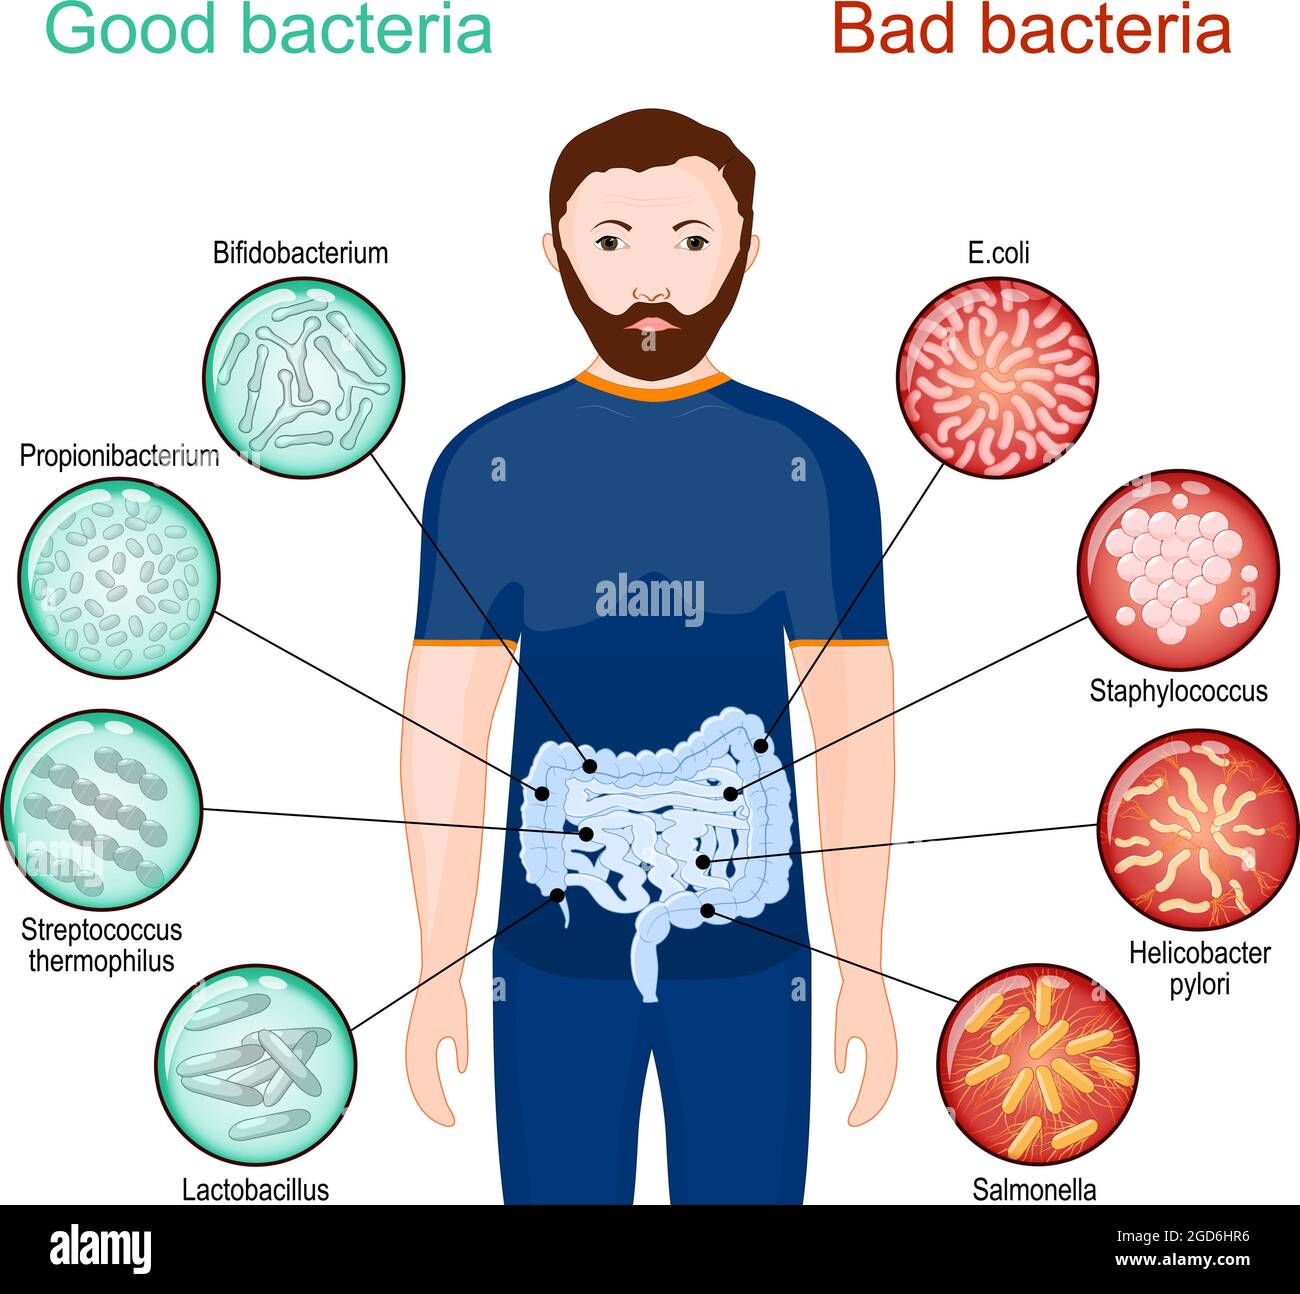 Good And Bad Bacteria Poster About Probiotics And Health Of Intestines